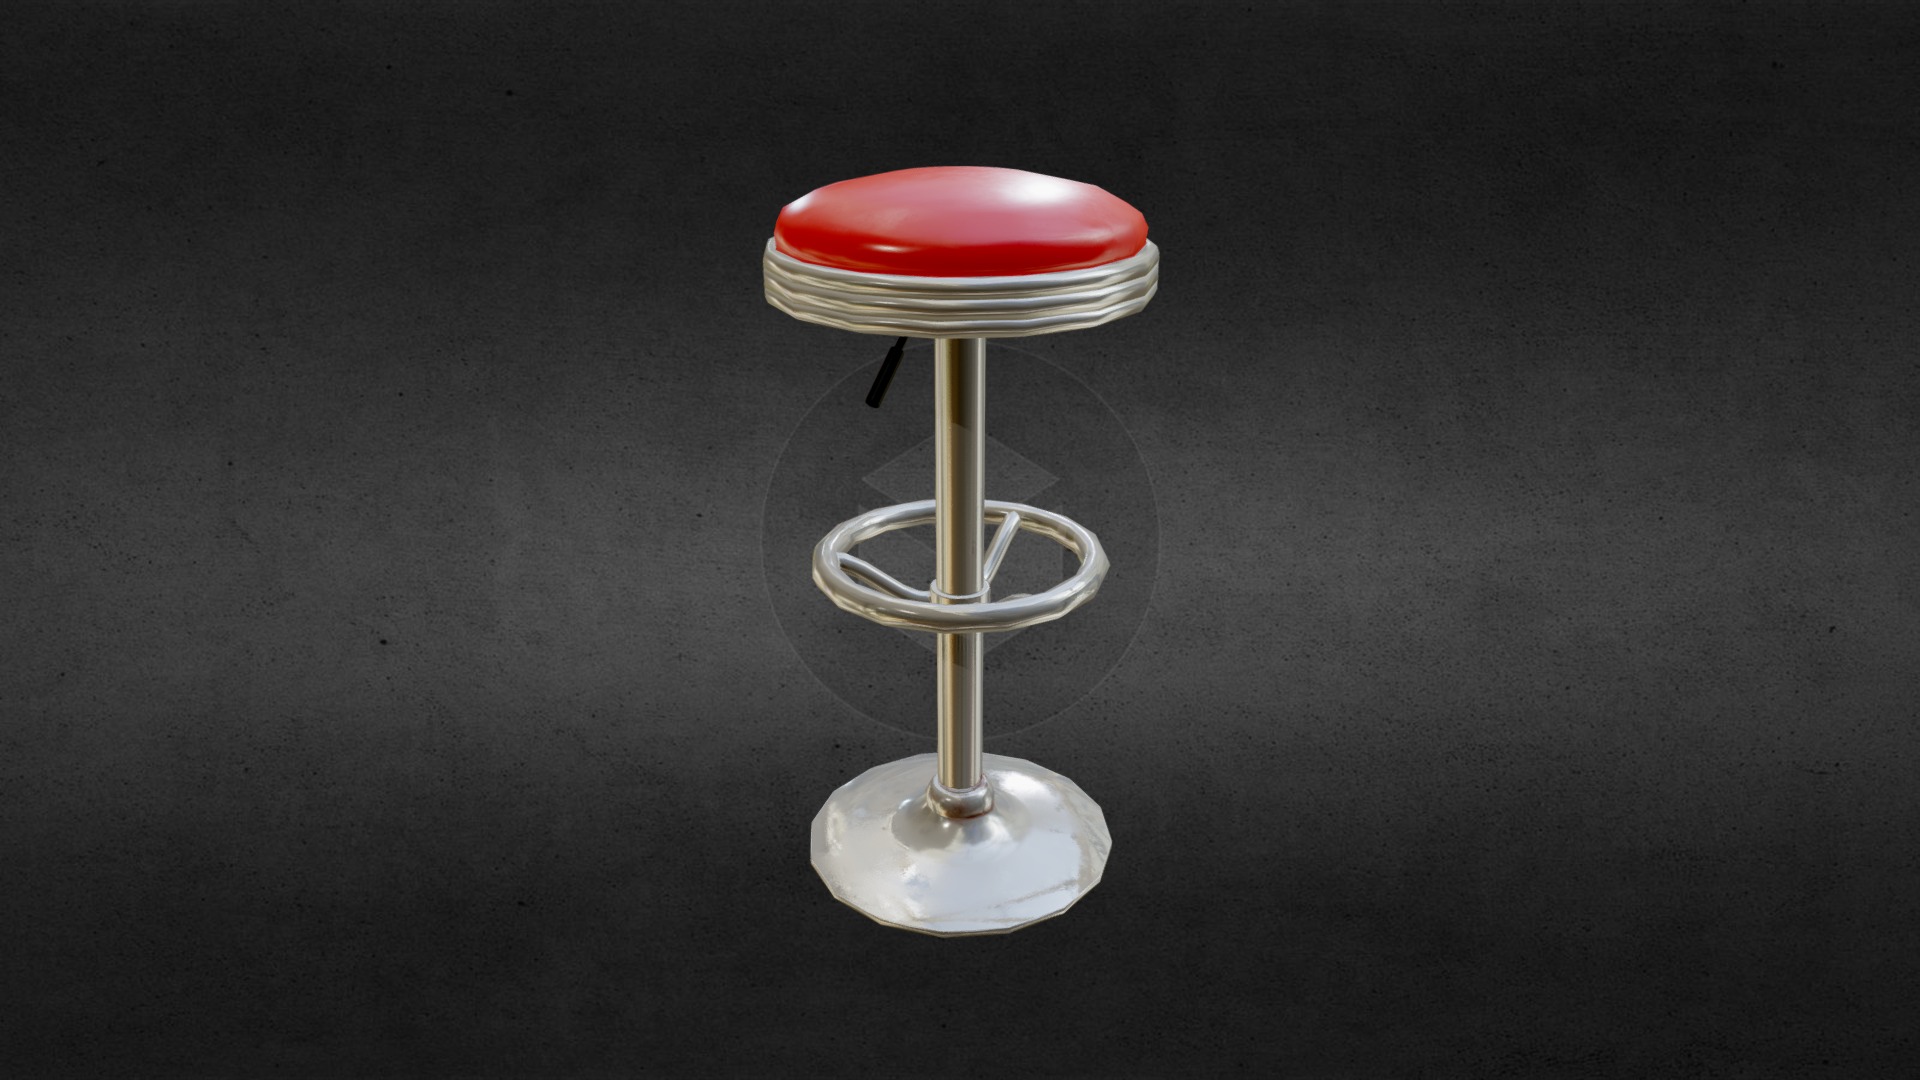 3D model 50’s soda fountain bar stool - This is a 3D model of the 50's soda fountain bar stool. The 3D model is about a small round table with a red and white top.